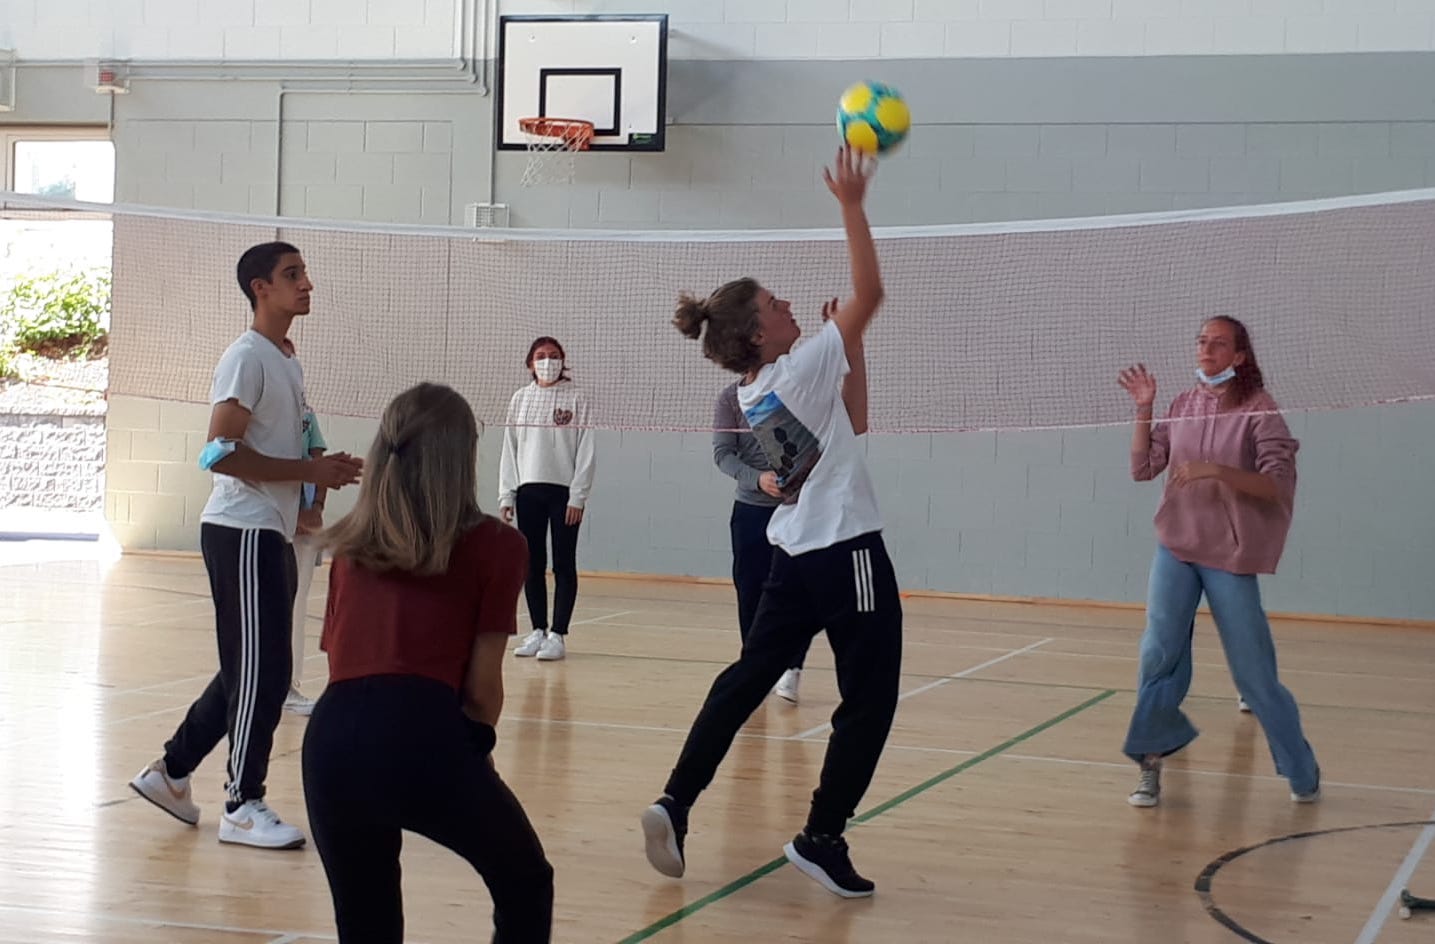 Students play a game of volleyball in the sports hall